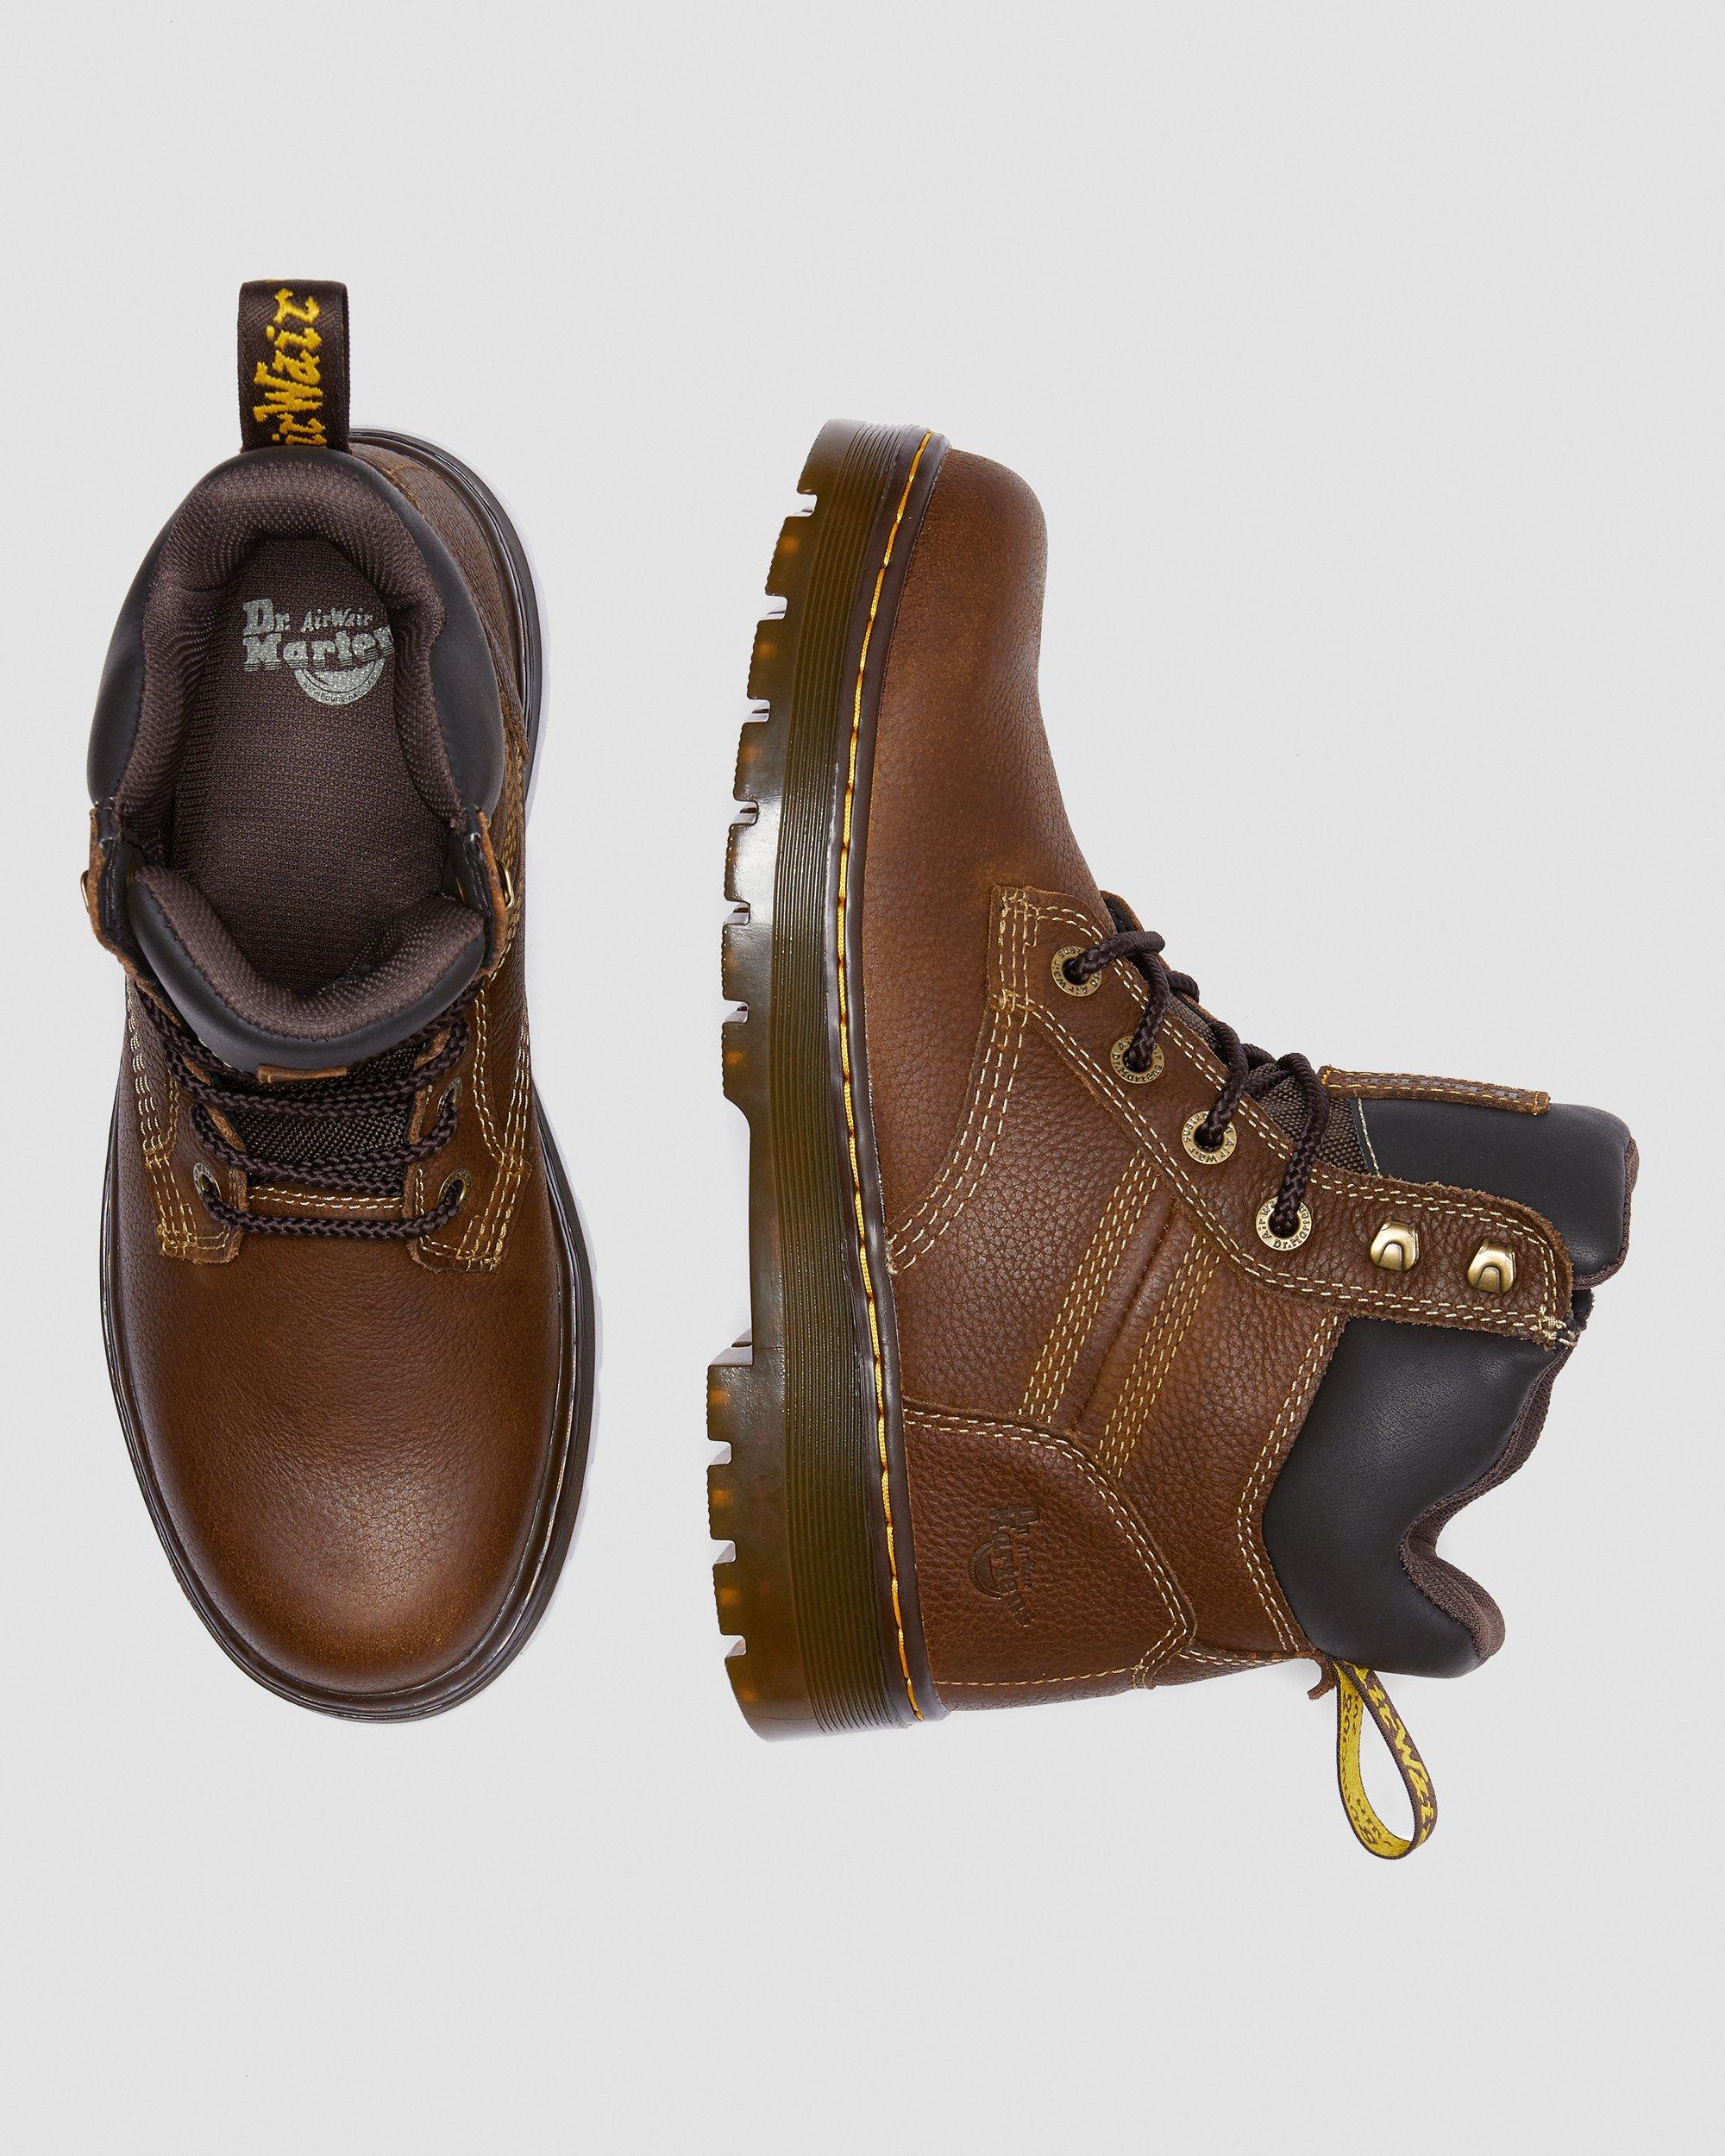 Details about   Dr Martens Mens Deluge EH Waterproof Safety Toe 6-Eye Boot 